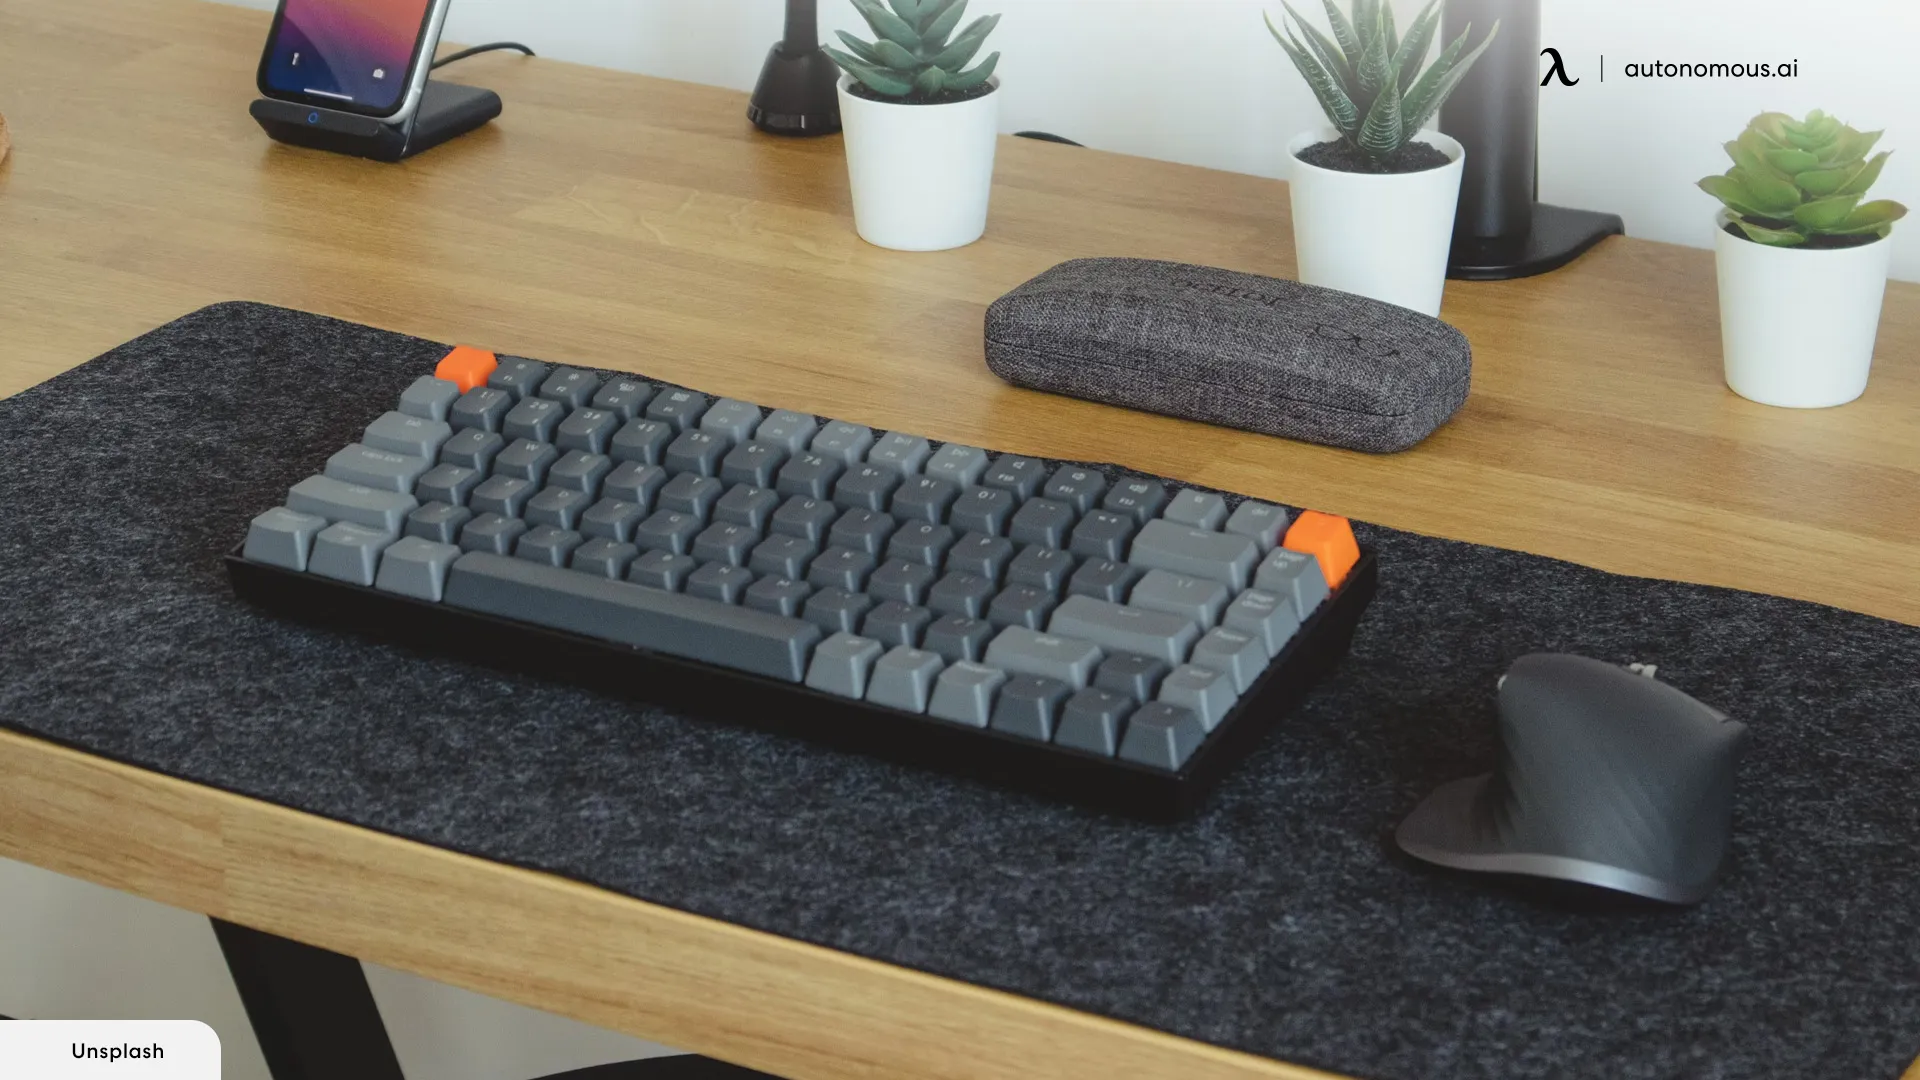 Which Keyboard is The Best When?